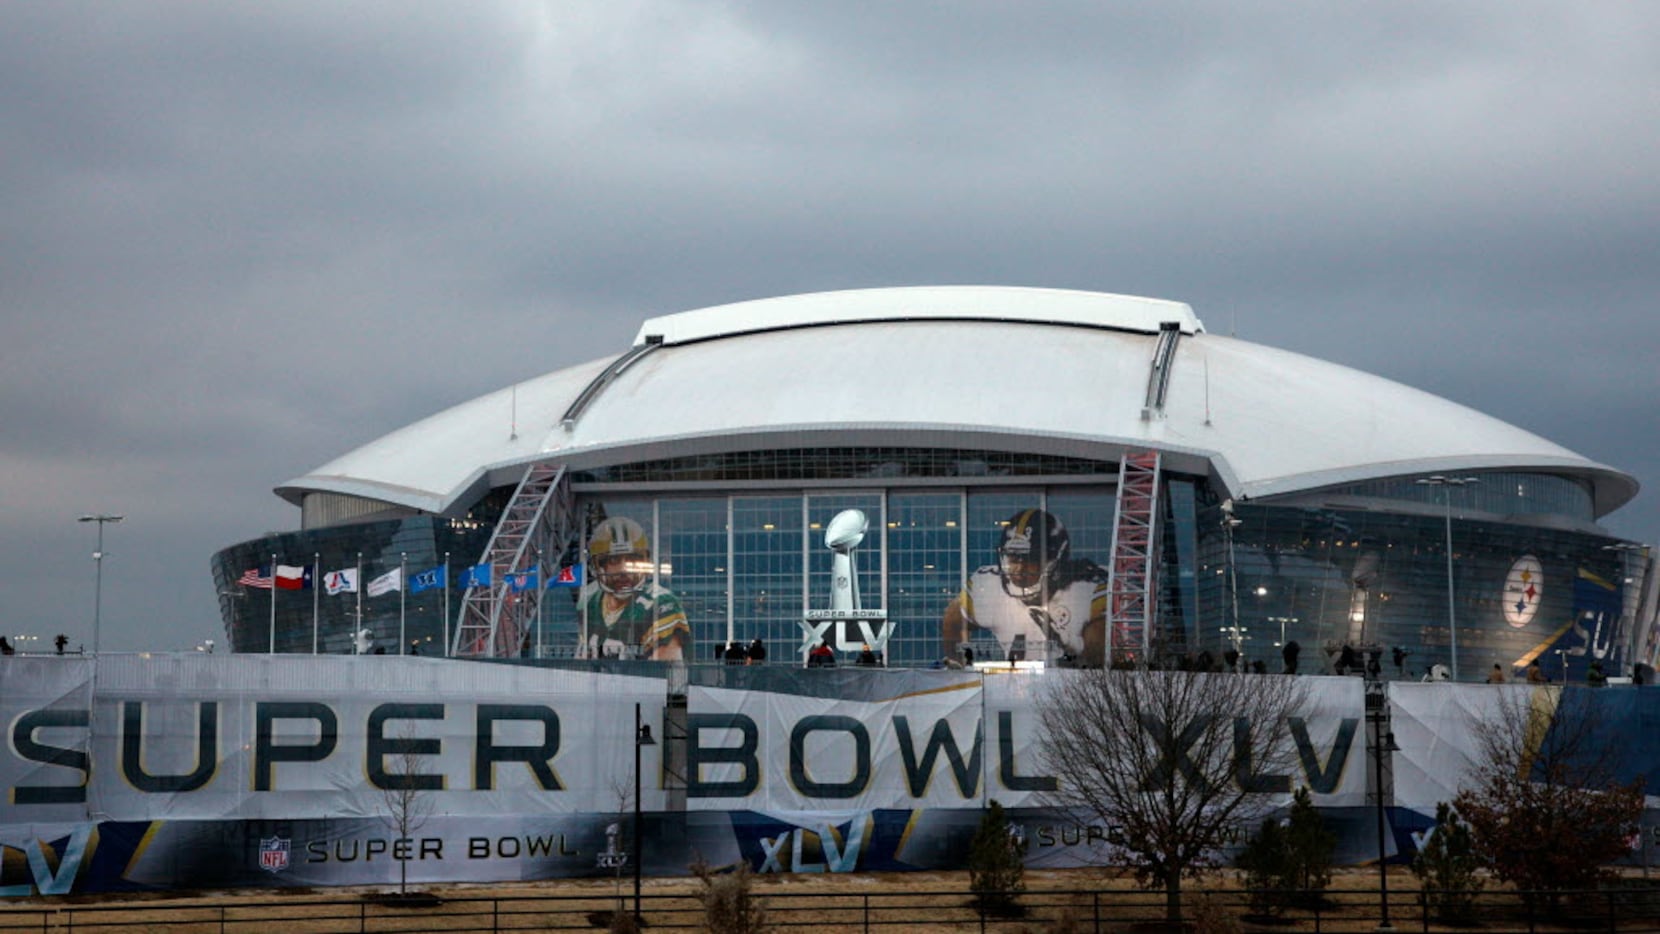 where's the super bowl 2022 being played